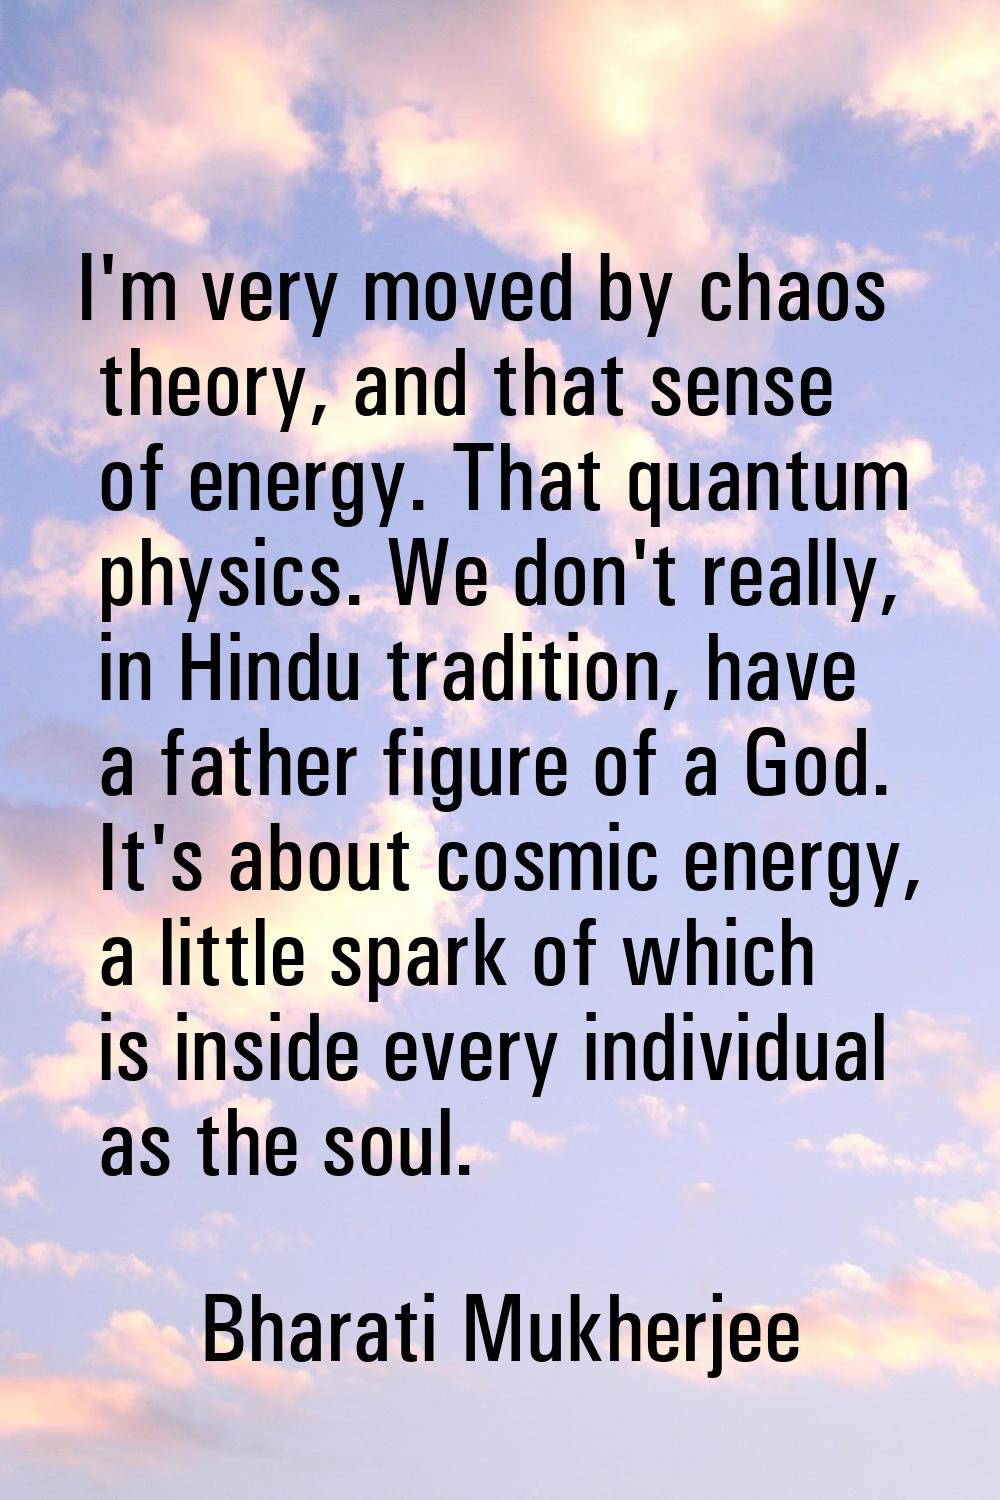 I'm very moved by chaos theory, and that sense of energy. That quantum physics. We don't really, in